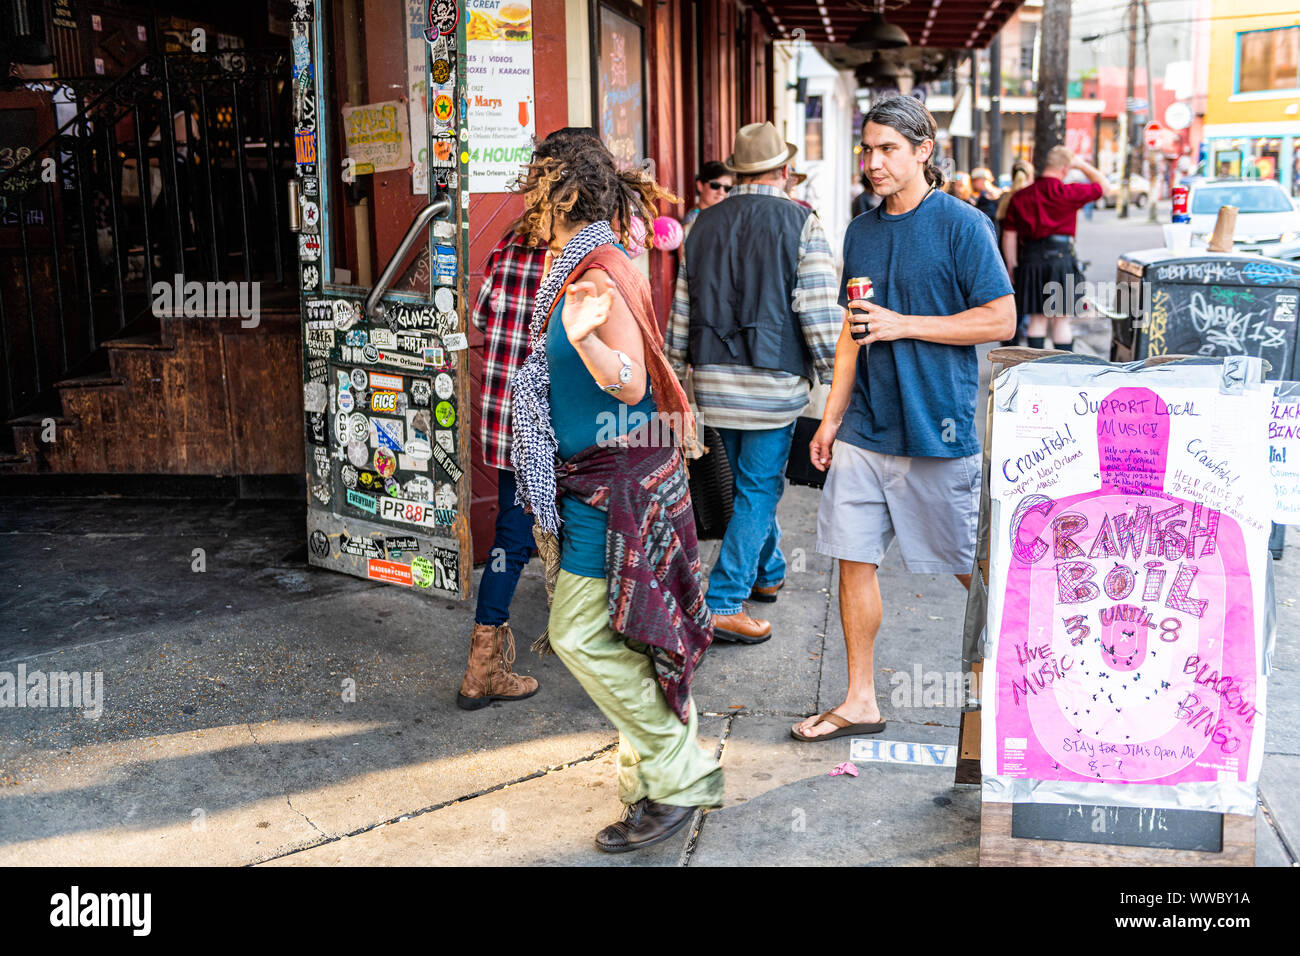 New Orleans, USA - April 22, 2018: People on French Quarter, Frenchmen street sidewalk of Louisiana old town city by entrance to Check Point Charlie M Stock Photo